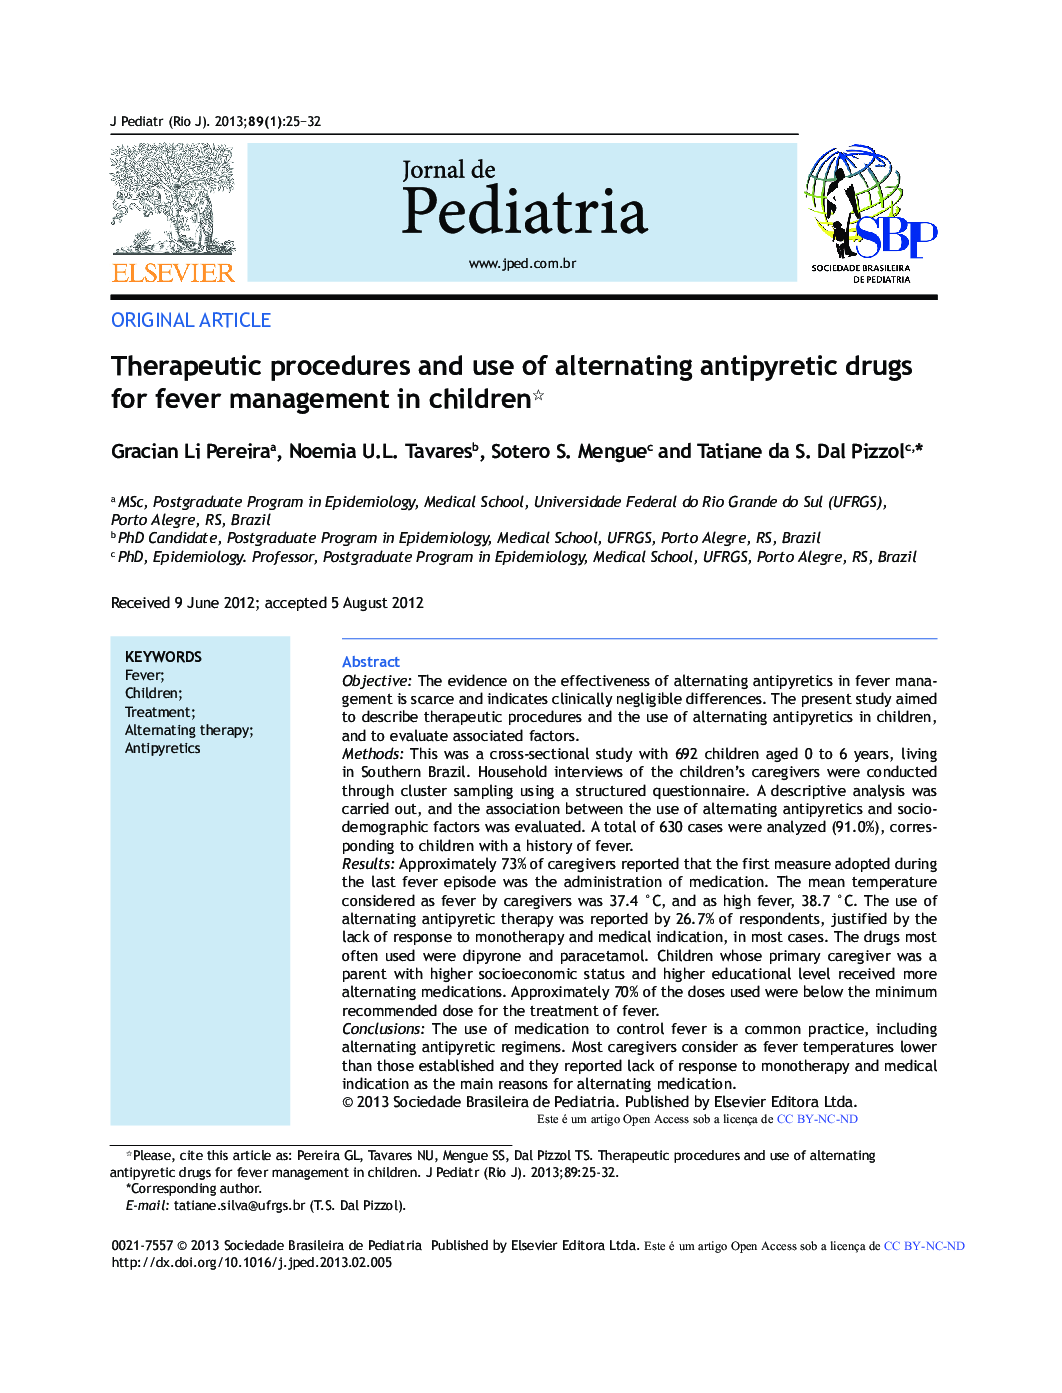 Therapeutic Procedures and Use of Alternating Antipyretic Drugs for Fever Management in Children 